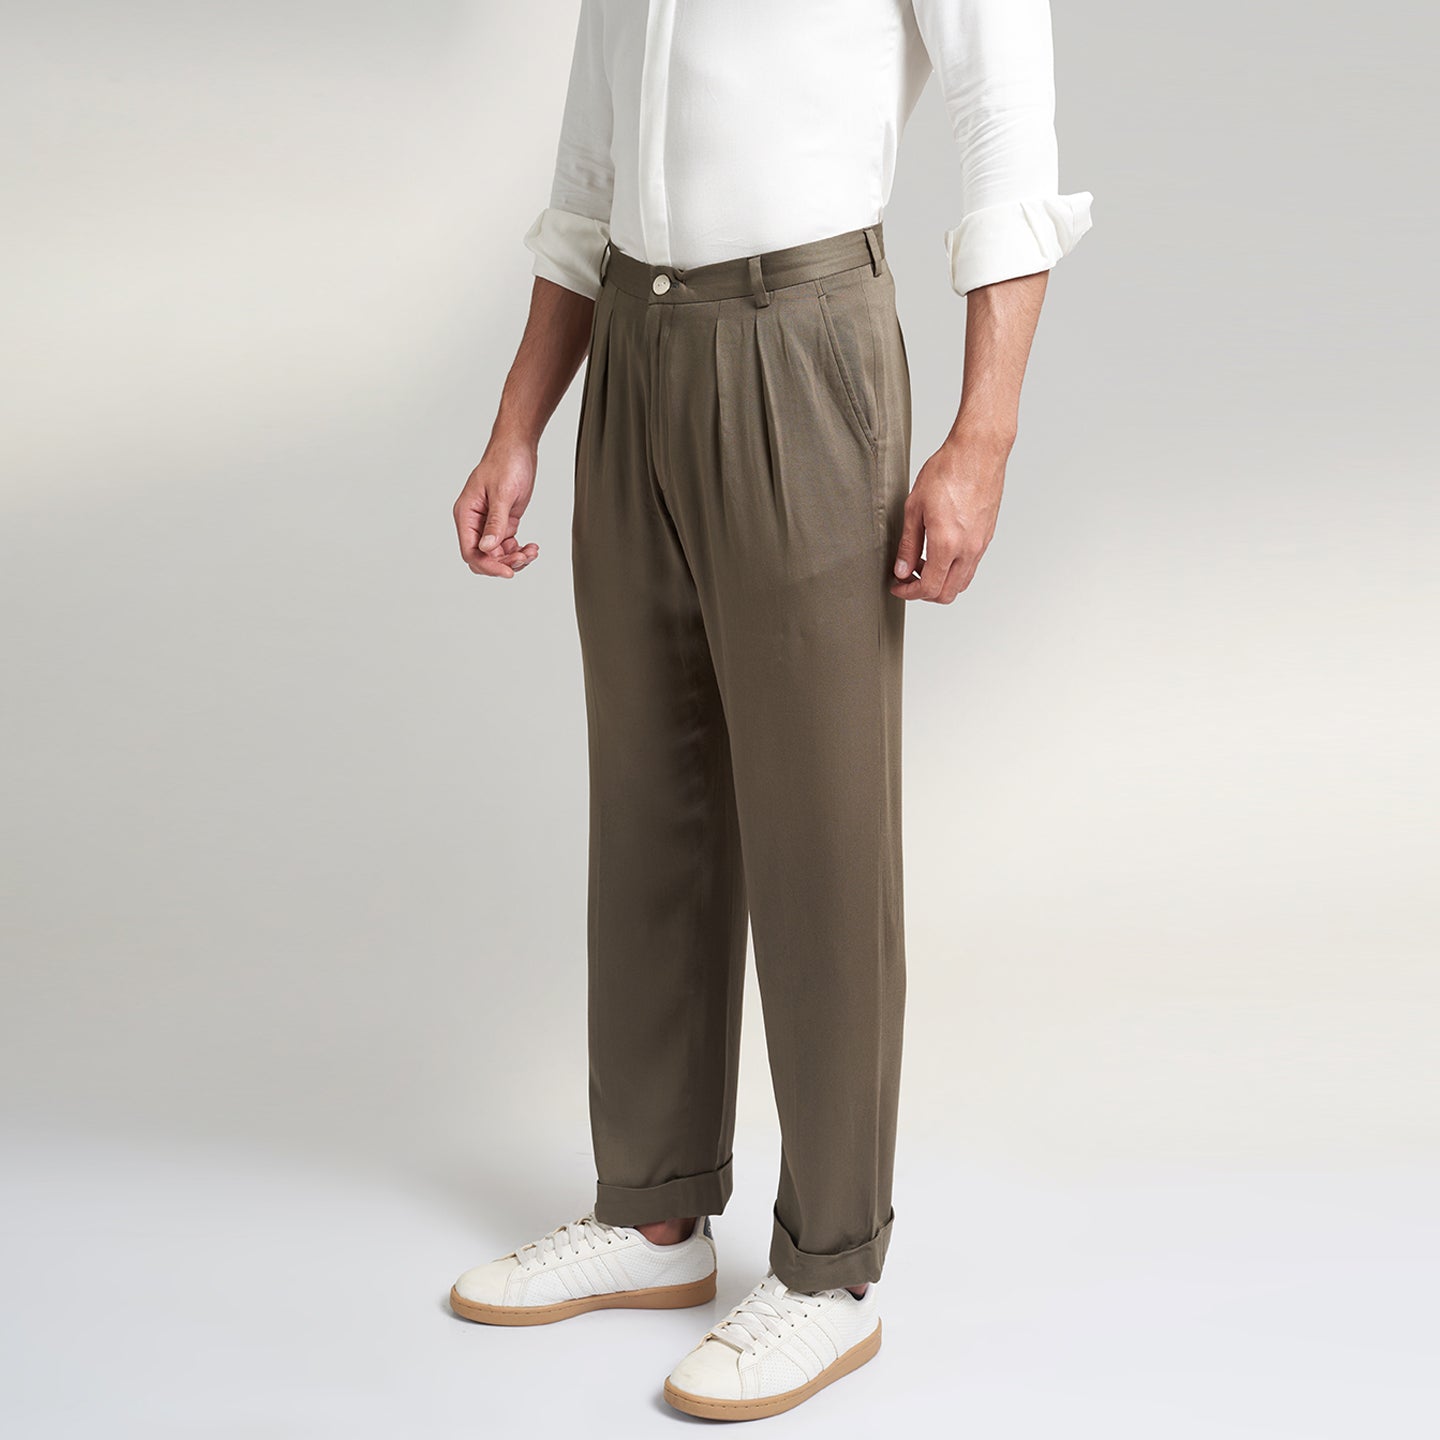 Lotus Stem fabric trousers, inspired by the timeless elegance of our Antique Reminiscence Collection. These trousers feature a comfortable fit, adorned with two front pleats and a stylish turn-up bottom. The super-soft fabric ensures a luxurious feel, making them an ideal choice for your leisurewear wardrobe.